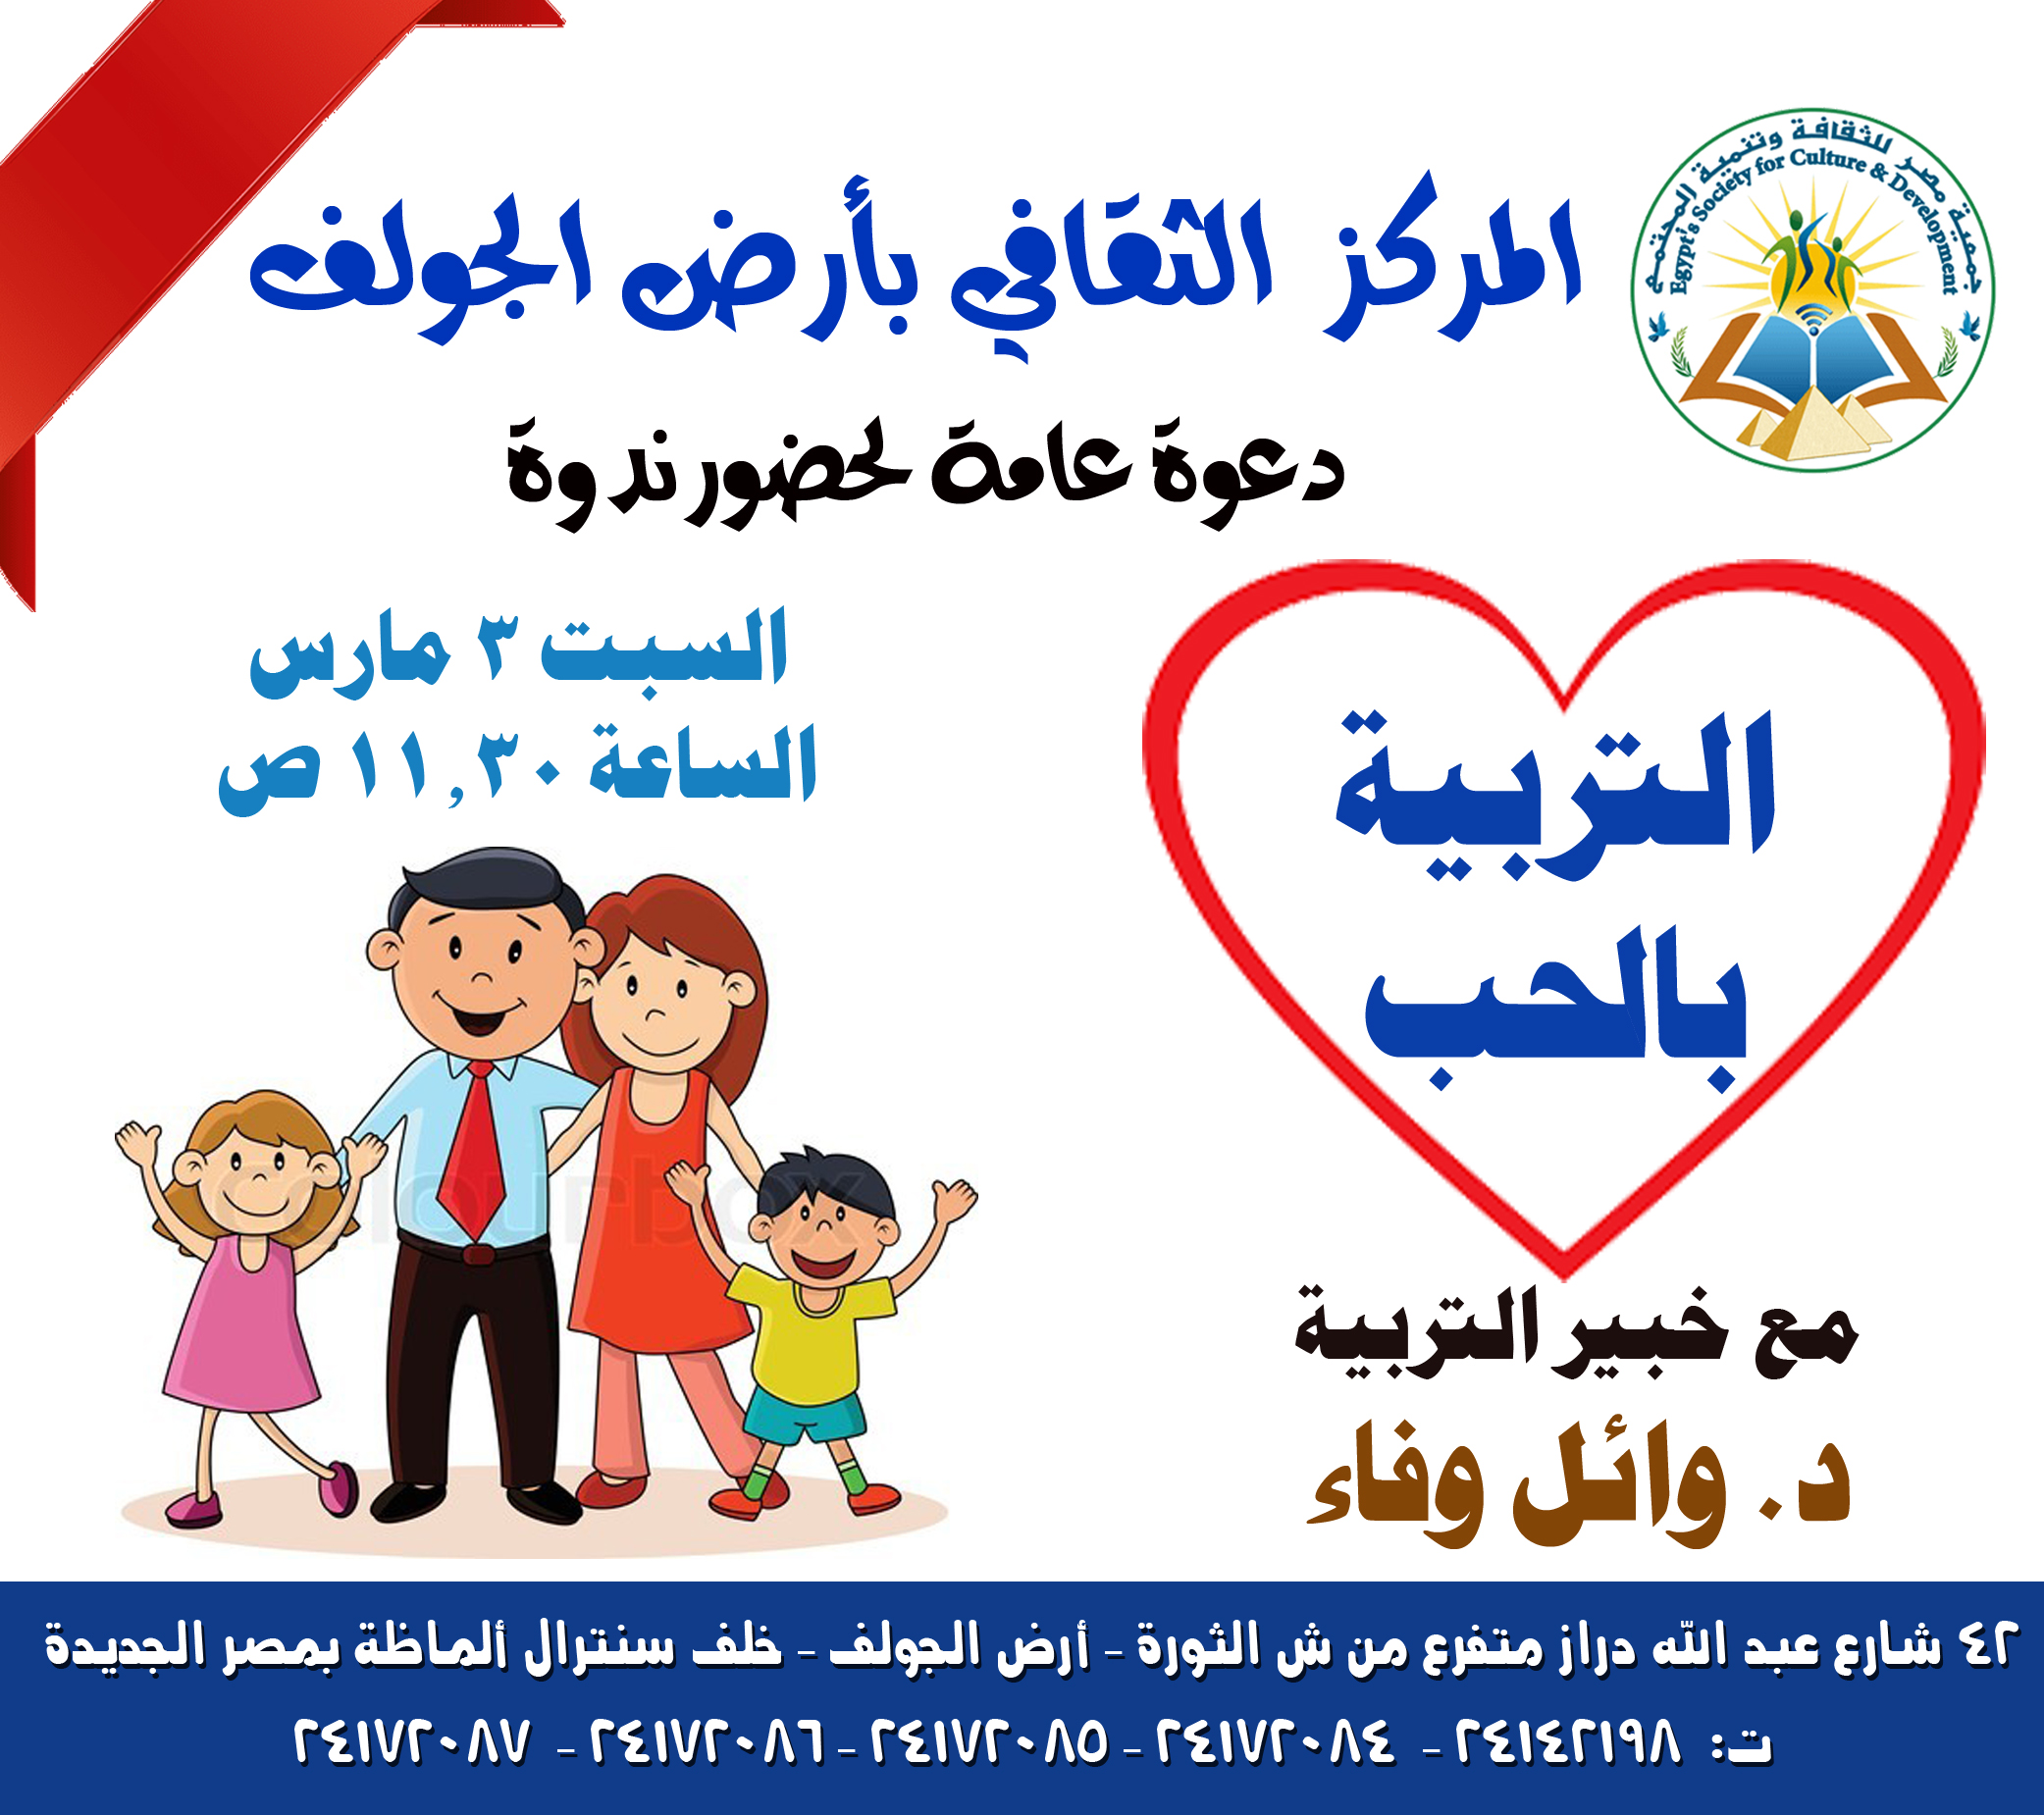 "Education through love" .. Symposium in the cultural center